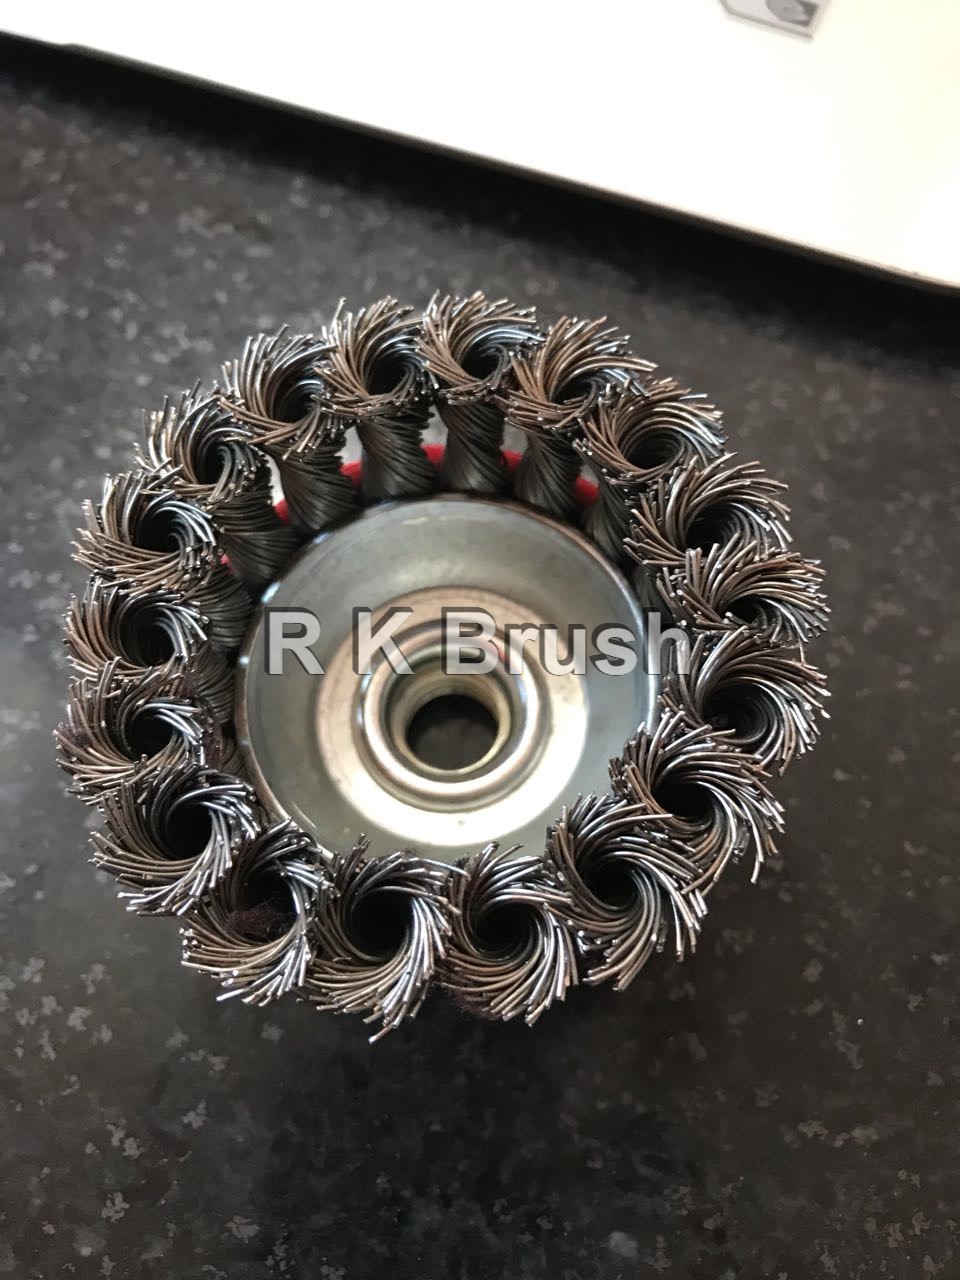 HEAVY DUTY CUP BRUSH OR TWIST KNOT CUP BRUSH 